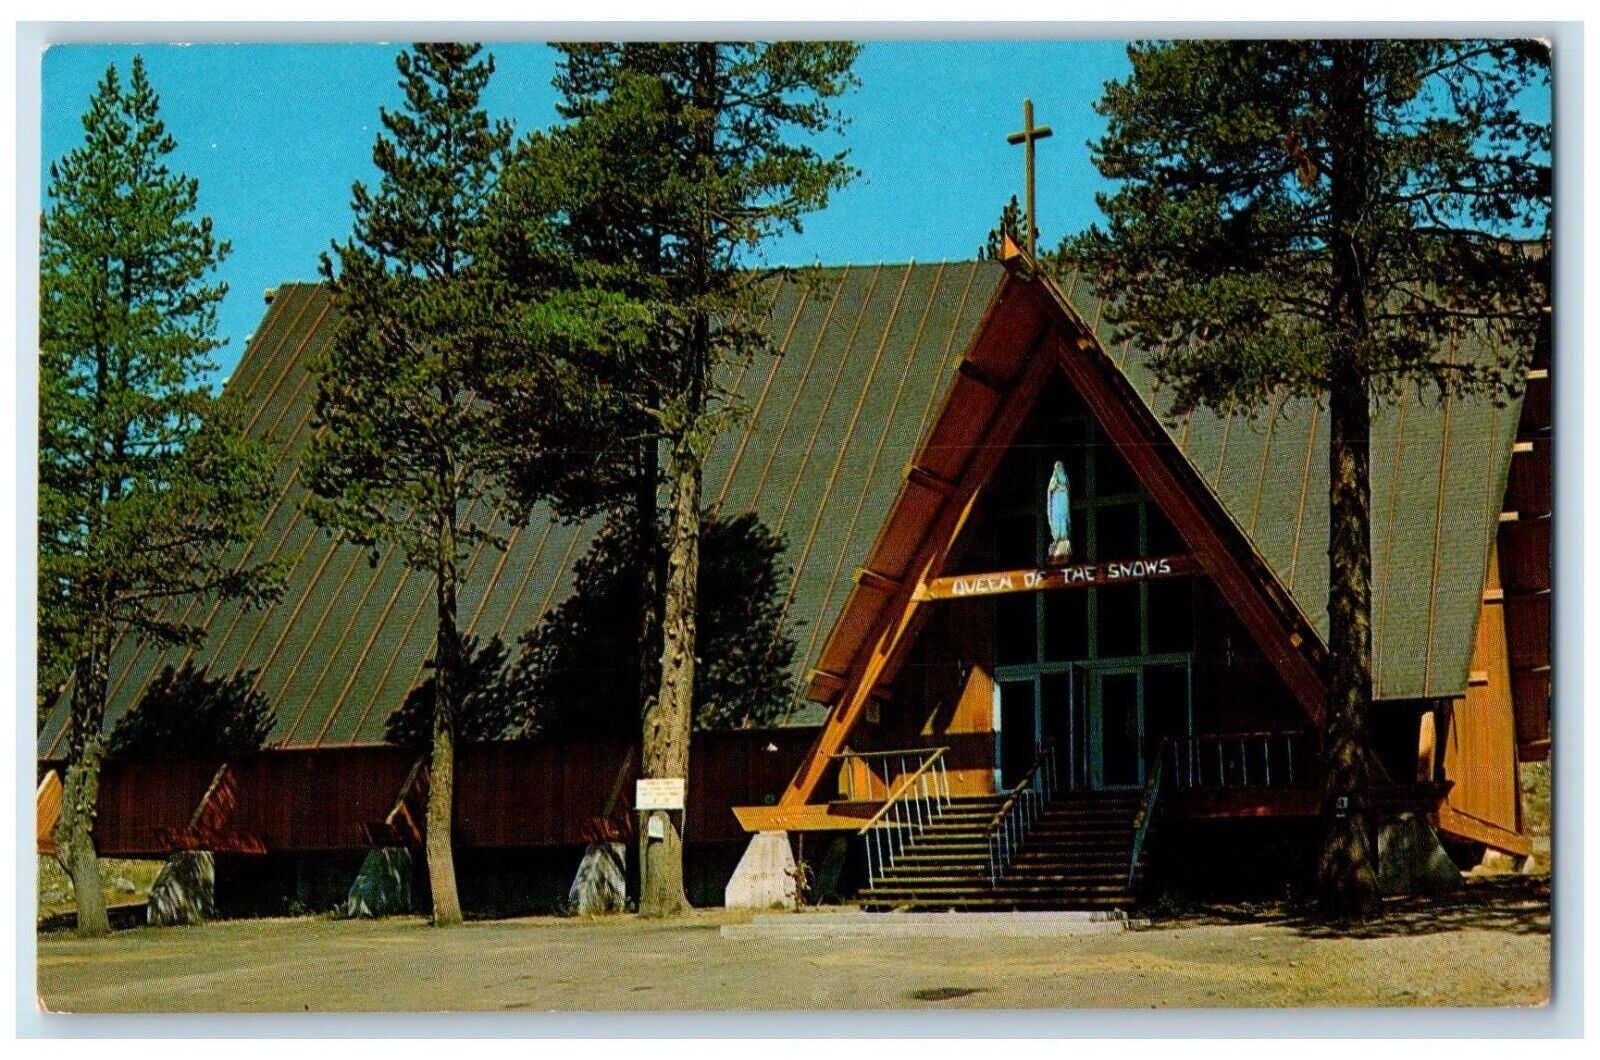 c1960's Olympic Chapel Queen Of The Snows California CA Vintage Postcard